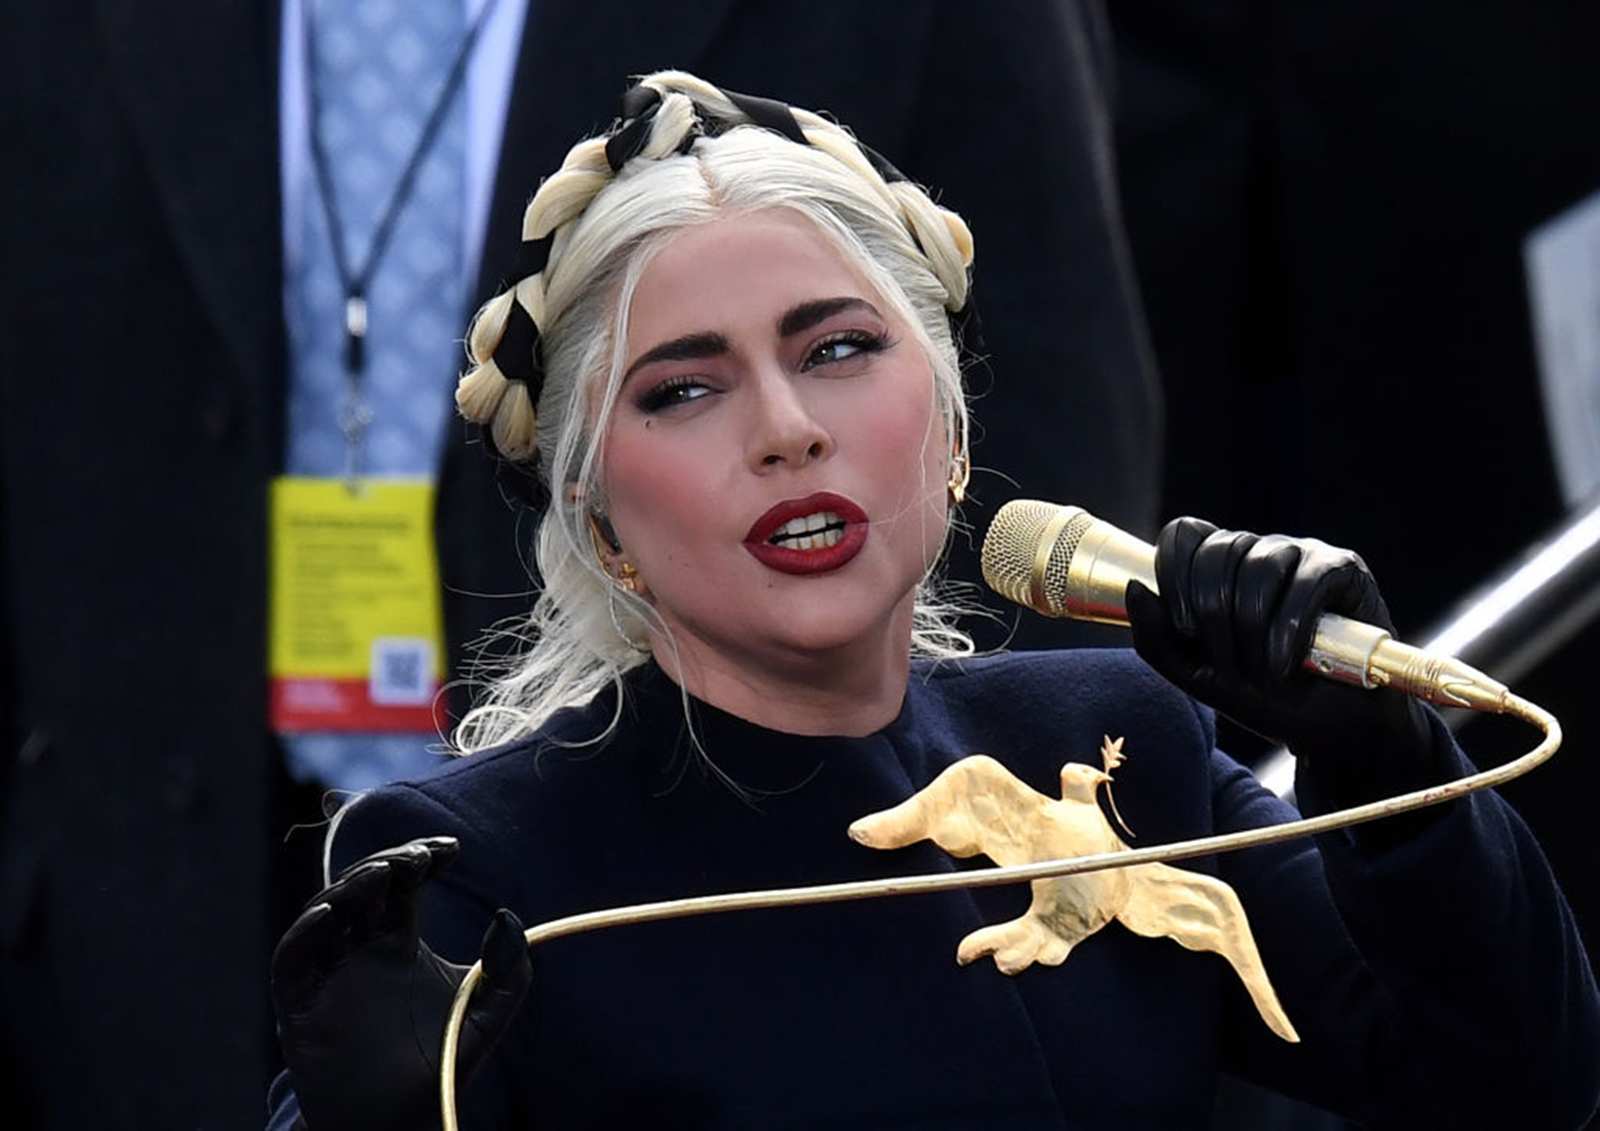 Joe Biden appoints FAGGOT Gaga to co-chair of revived presidential committee | American Military News